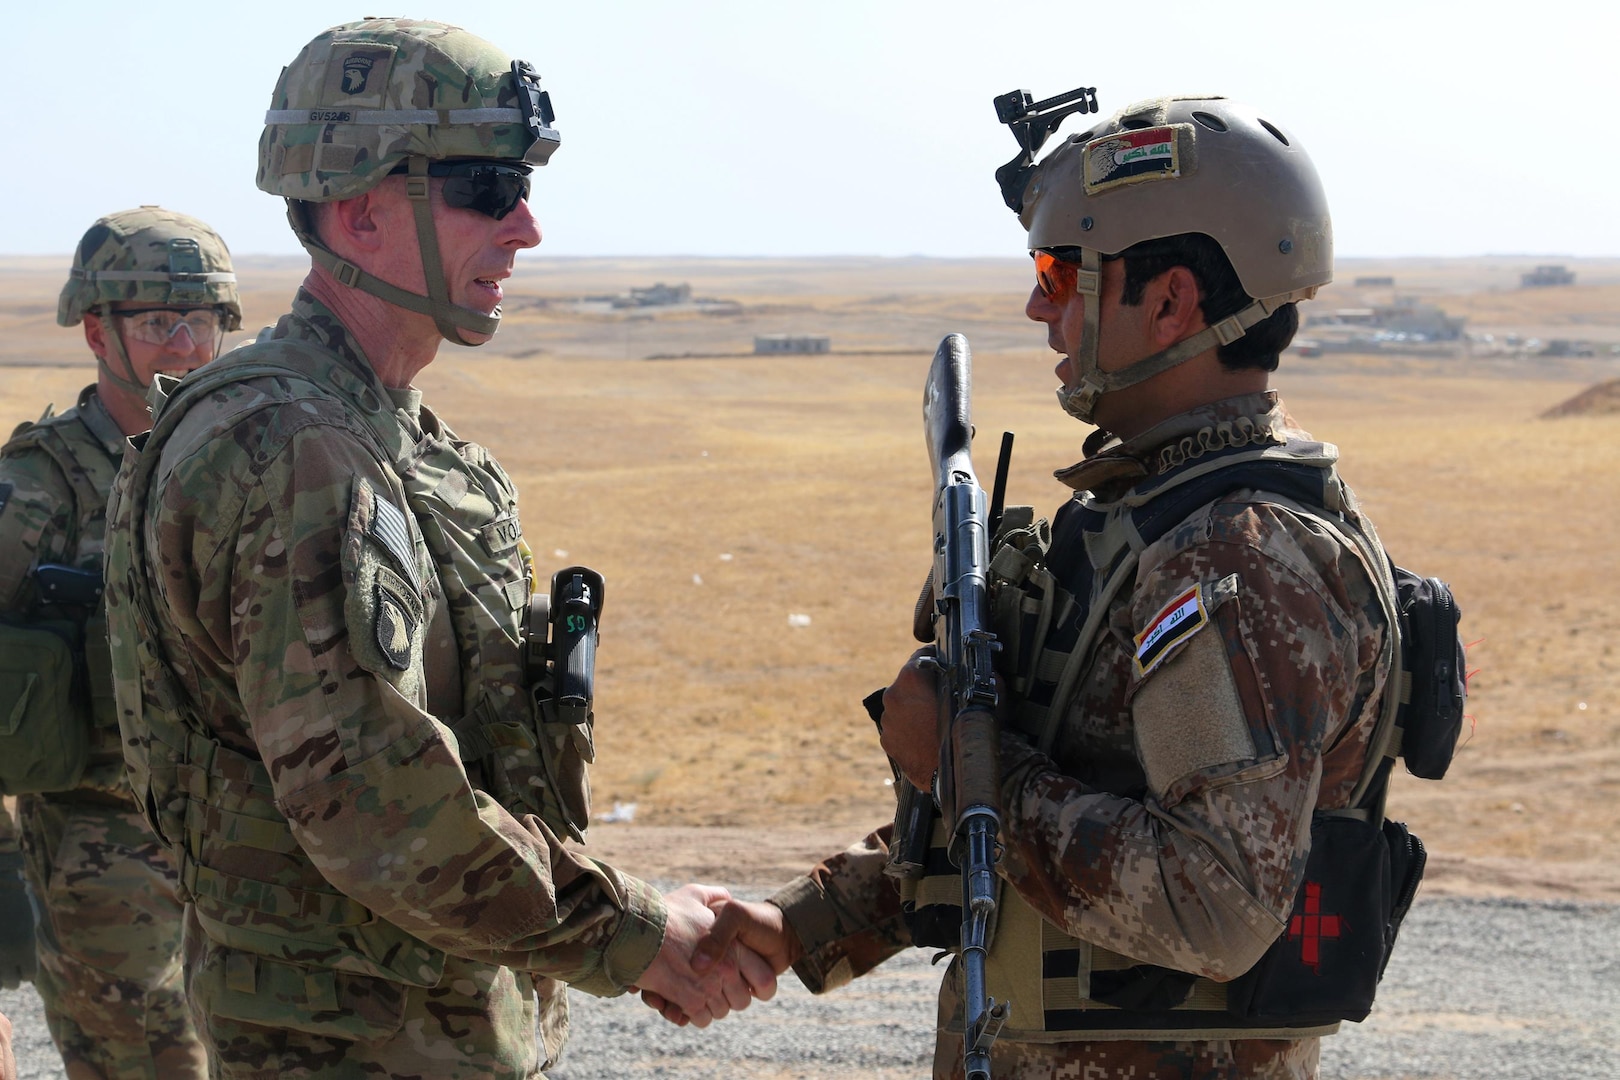 U.S. Army Maj. Gen. Gary J. Volesky, left, commander, Combined Joint Forces Land Component Command – Operation Inherent Resolve, visits with an Iraqi soldier at a tactical assembly area in  northern Iraq, Iraq, prior to the start of the Mosul offensive, Oct. 10, 2016. The TAAs are where ISF assembled prior to making their push toward Mosul. A Coalition of regional and international nations have joined together to defeat the Islamic State of Iraq and the Levant and the threat they pose to Iraq, Syria, the region and the wider international community. (U.S. Army photo by Sgt. 1st Class R.W. Lemmons IV)